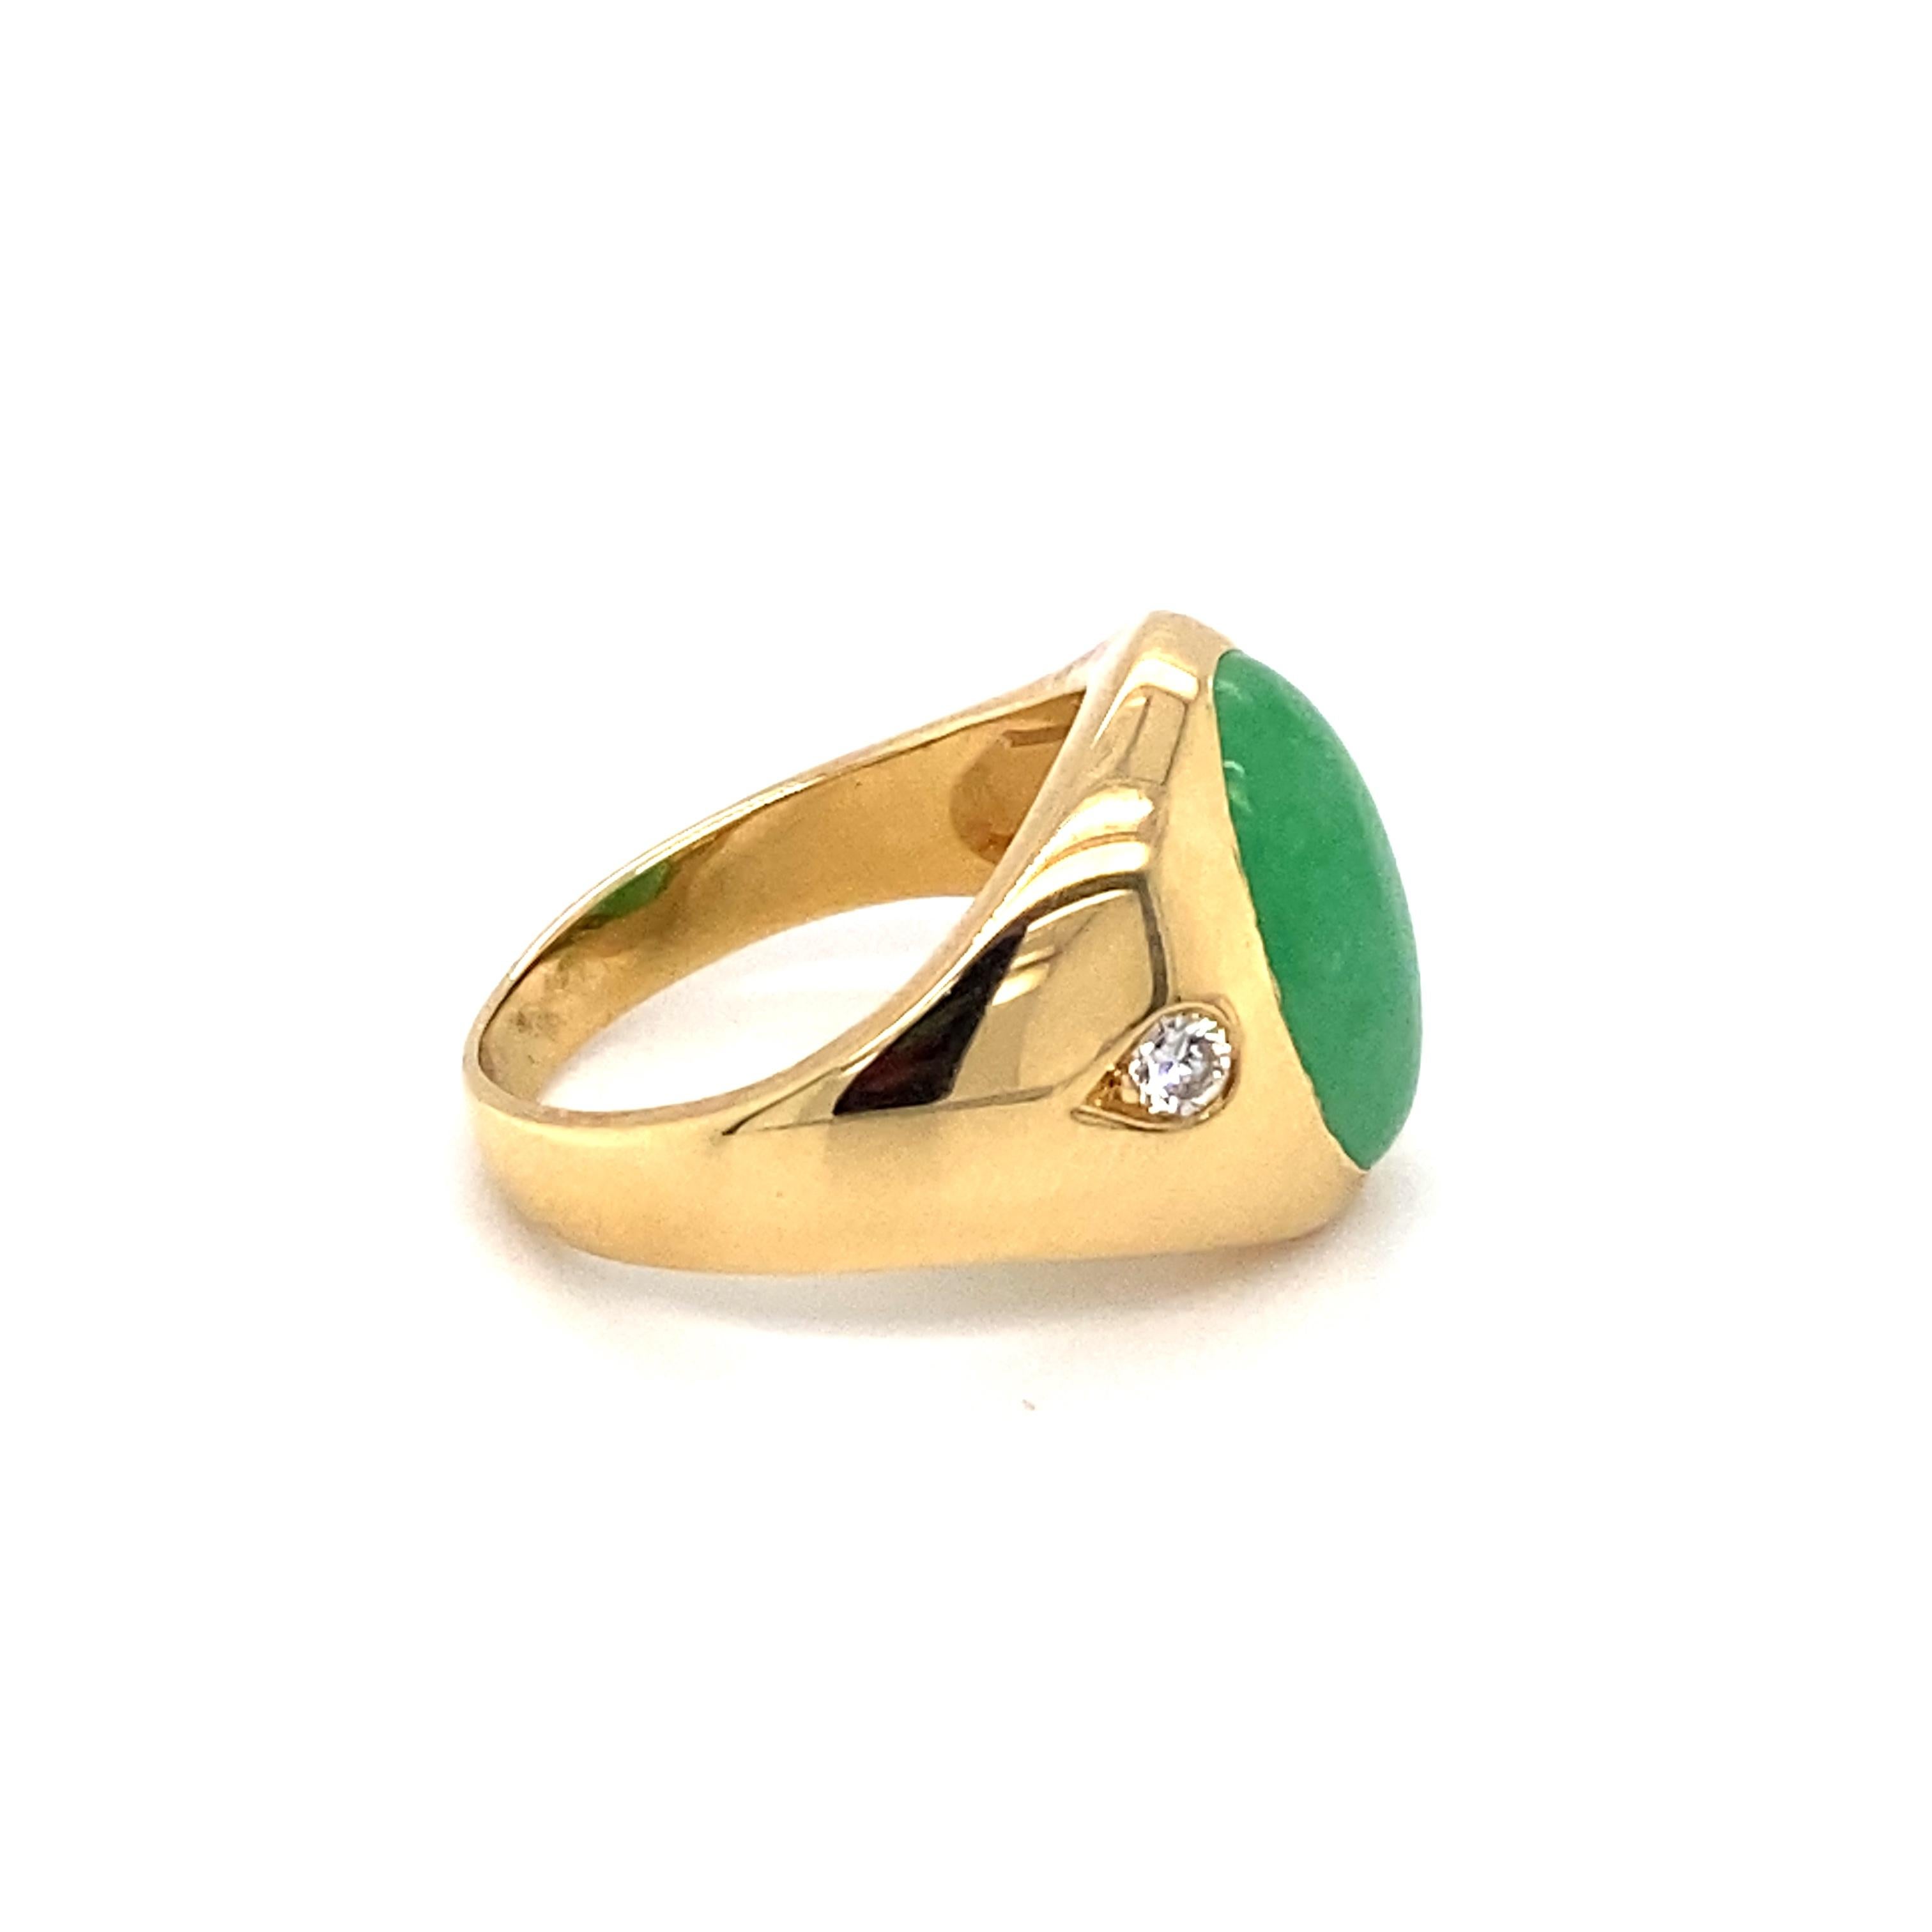 Hallmarked Designer: CDL
Metal Type: 18 karat yellow gold
Weight: 12 grams
Size: US 8.5, resizable

Diamond Details:
Carat: 0.20 carat total weight
Shape: Round brilliant
Color: G
Clarity: VS